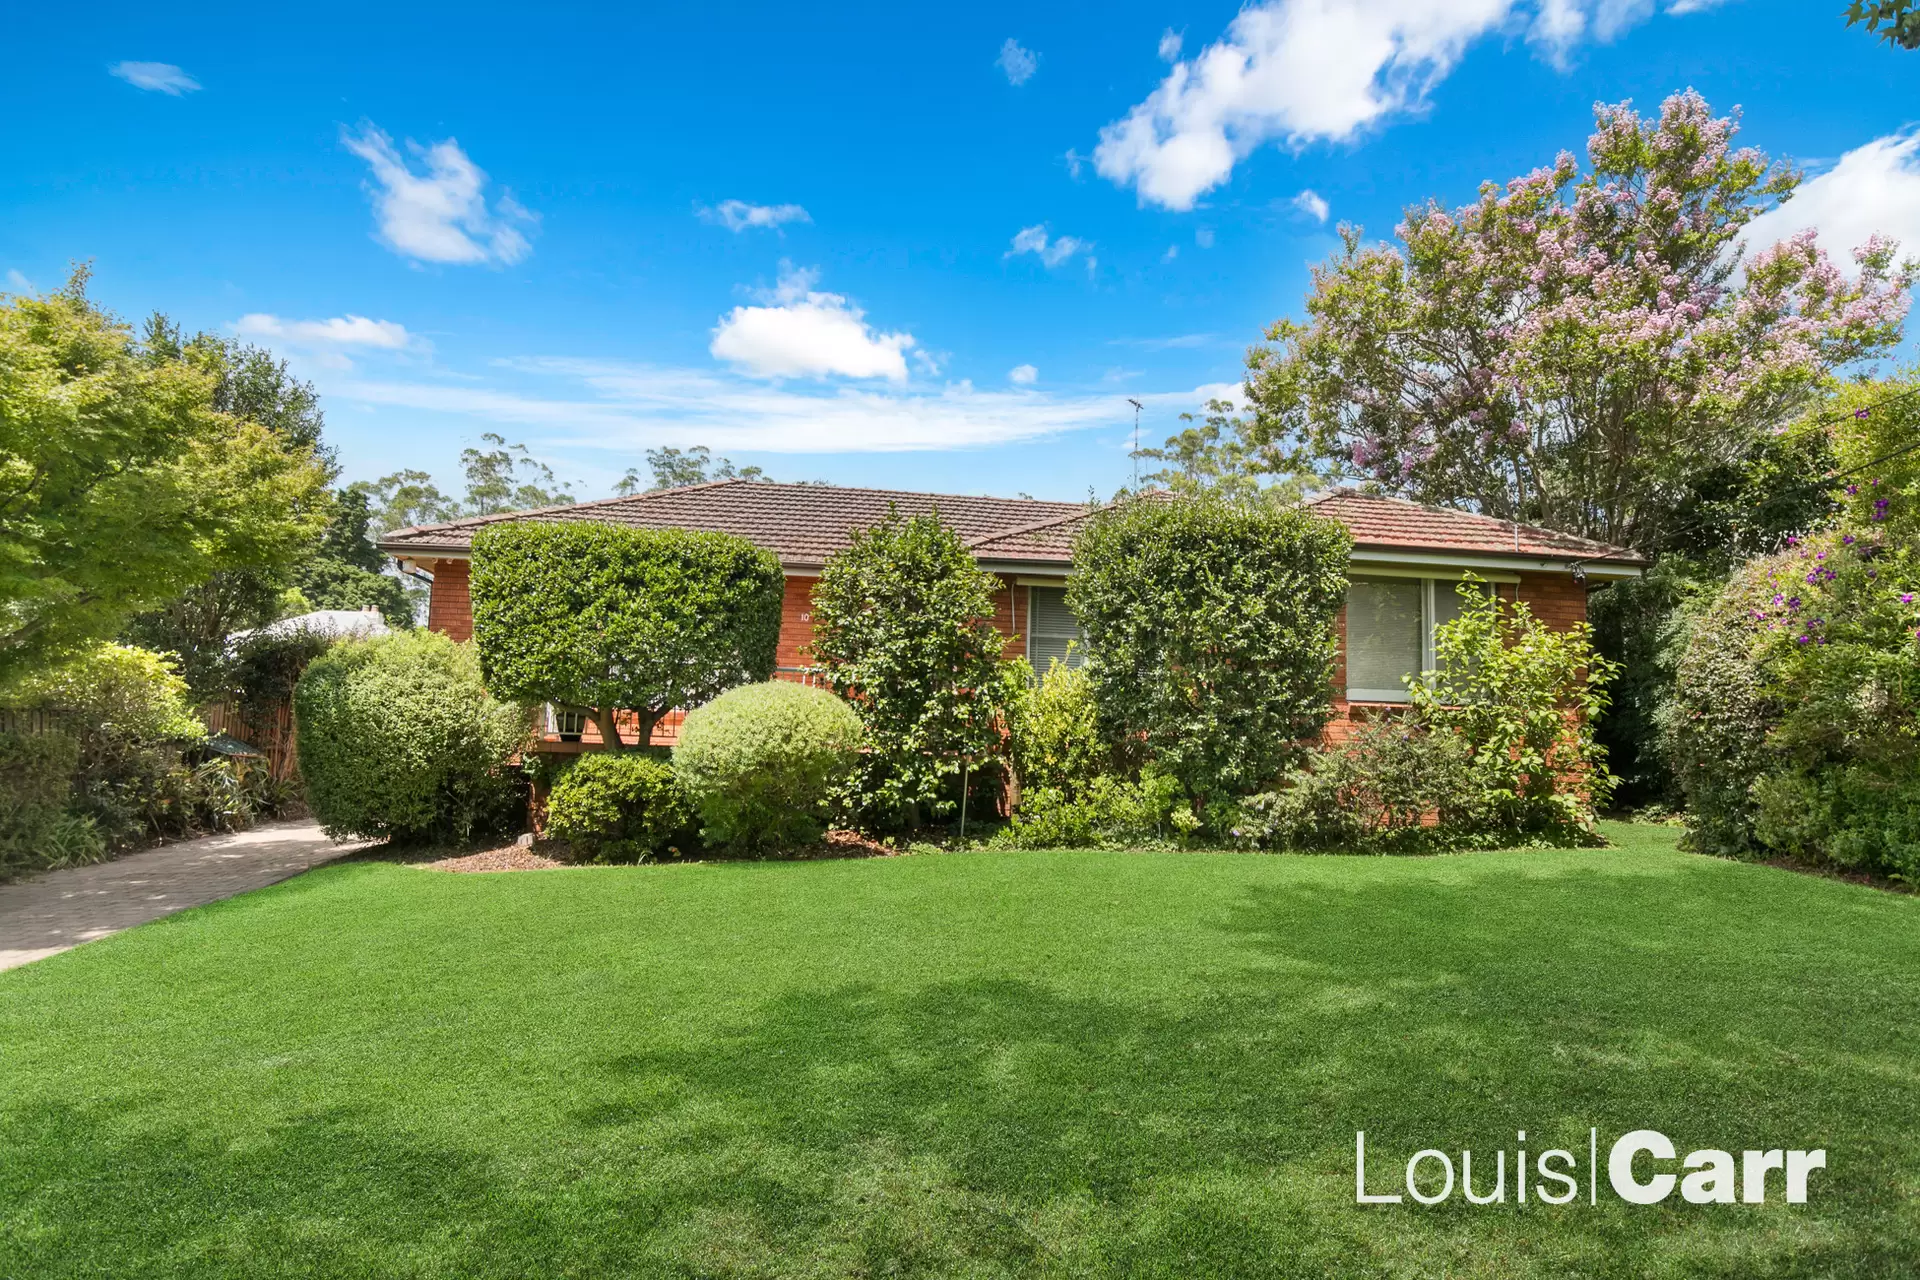 Photo #1: 10 Star Crescent, West Pennant Hills - Sold by Louis Carr Real Estate